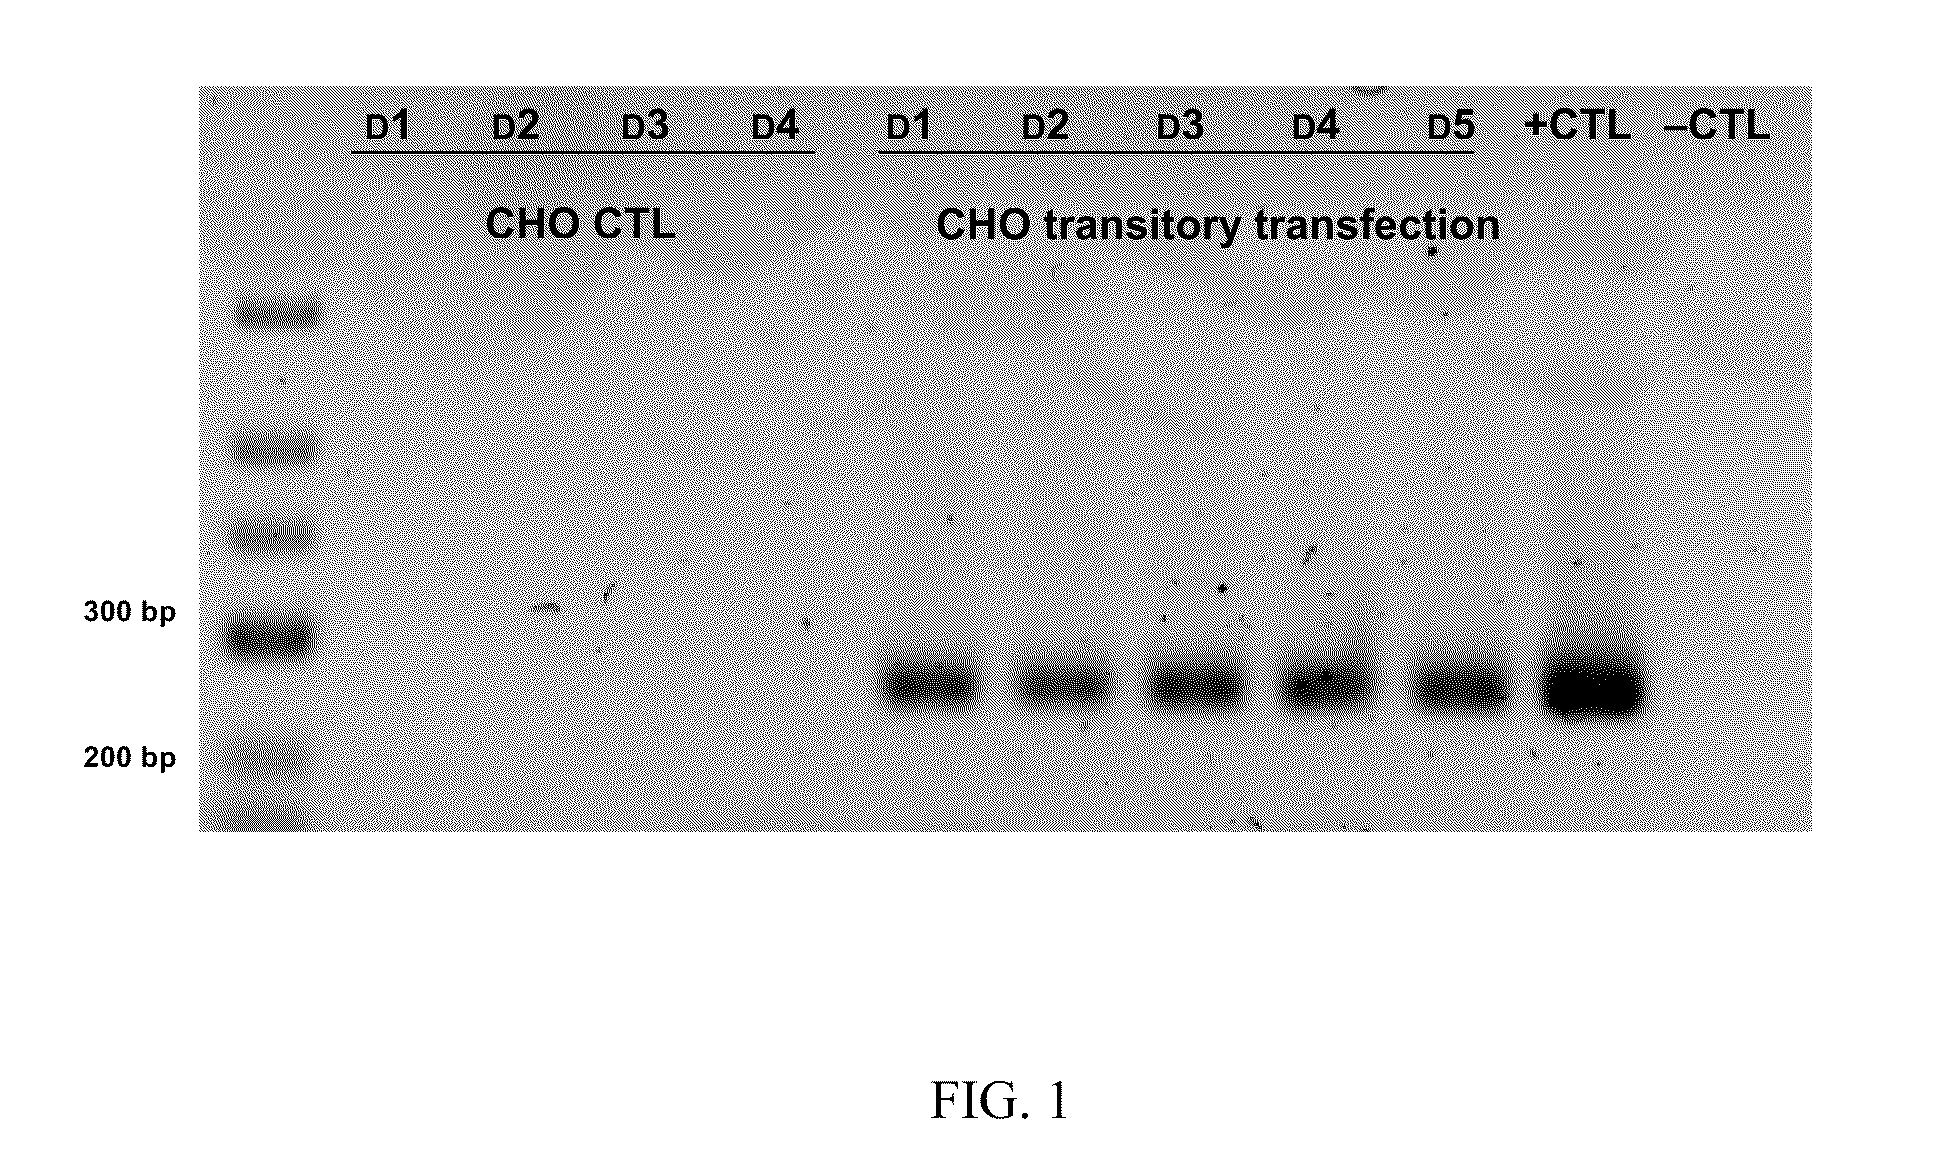 Recombinant proteins having haemostatic activity and capable of inducing platelet aggregation